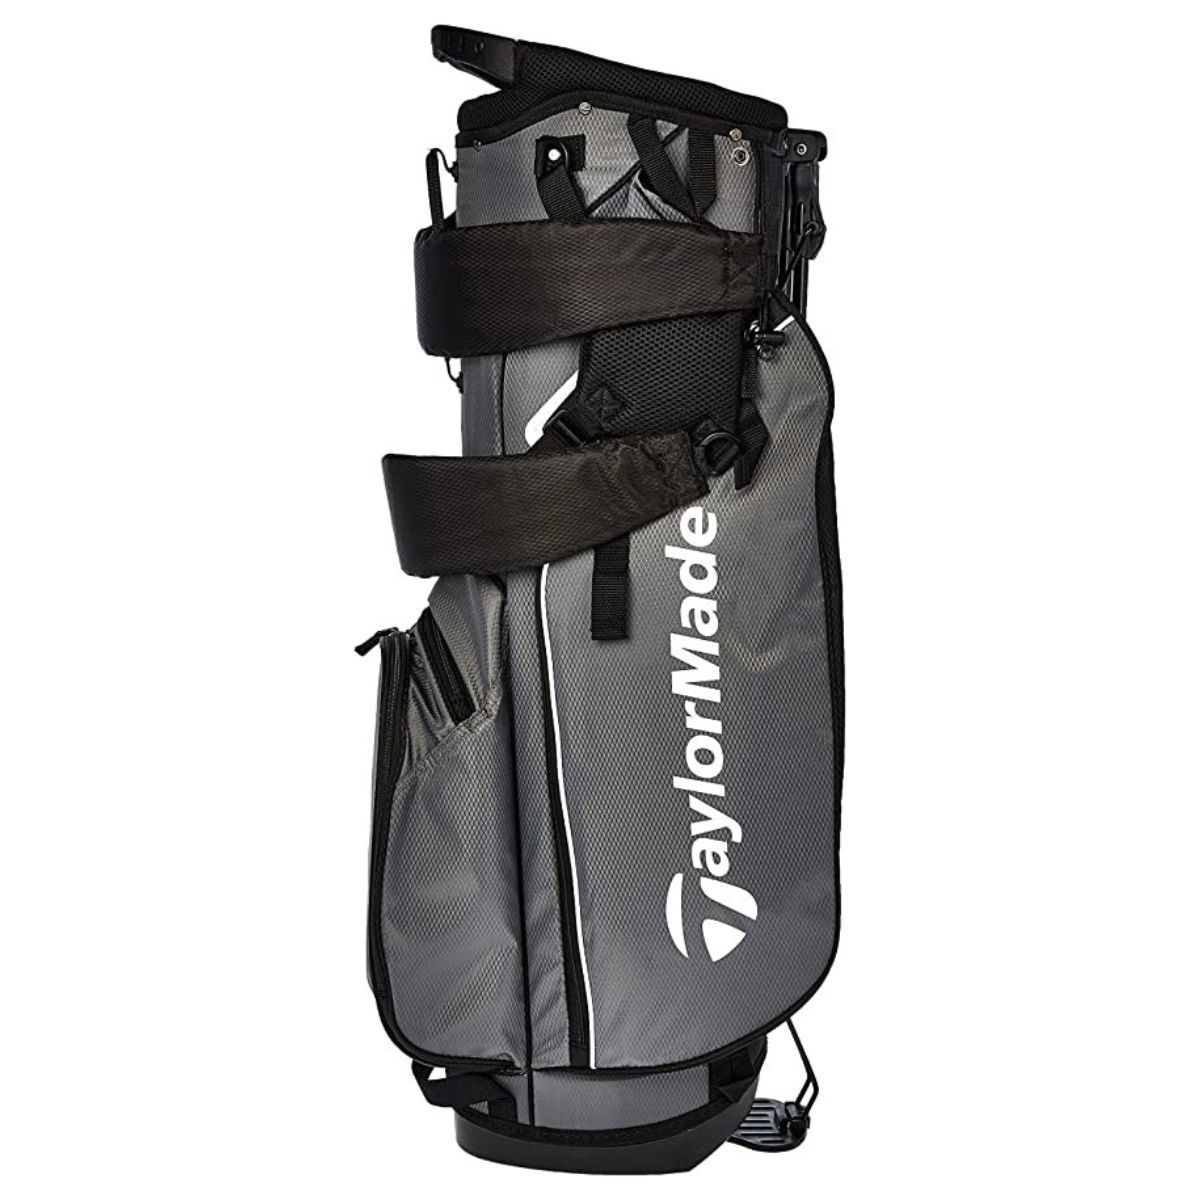 Amazon.com : GGTG Golf Stand Bag Light Weight 5 Pounds Black & White :  Sports & Outdoors